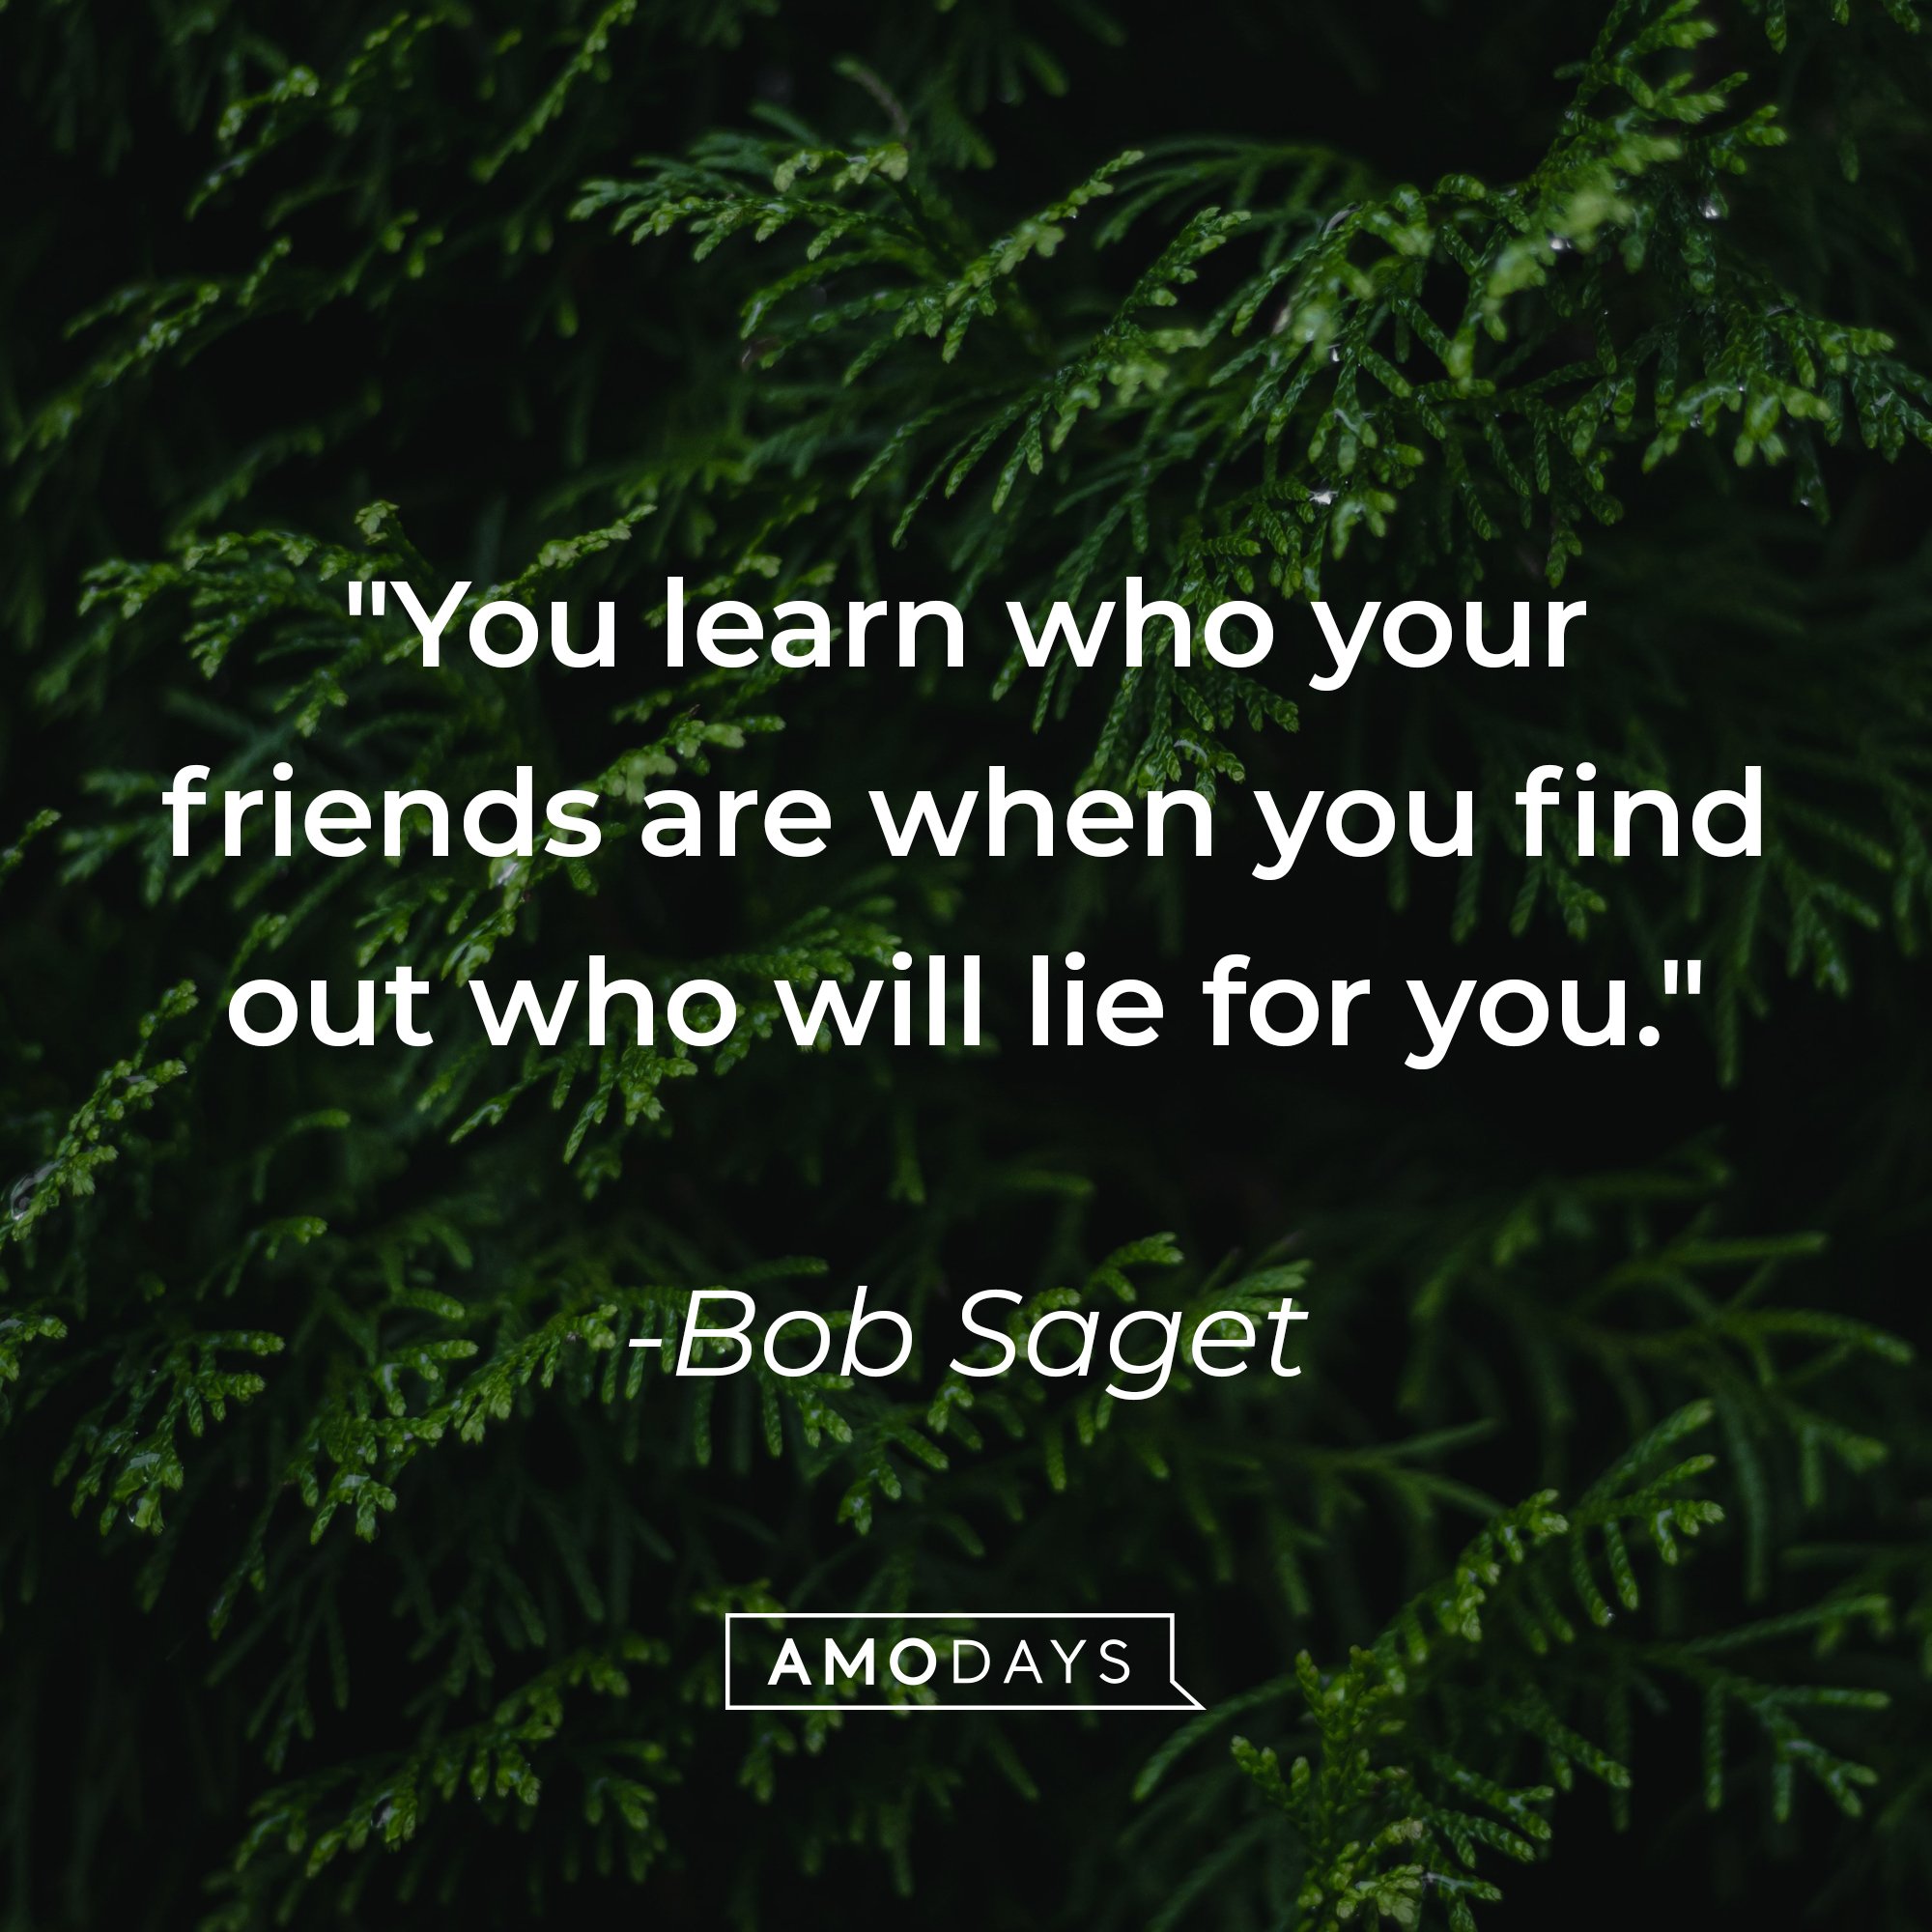  Bob Saget’s quote: "You learn who your friends are when you find out who will lie for you." | Image: AmoDays